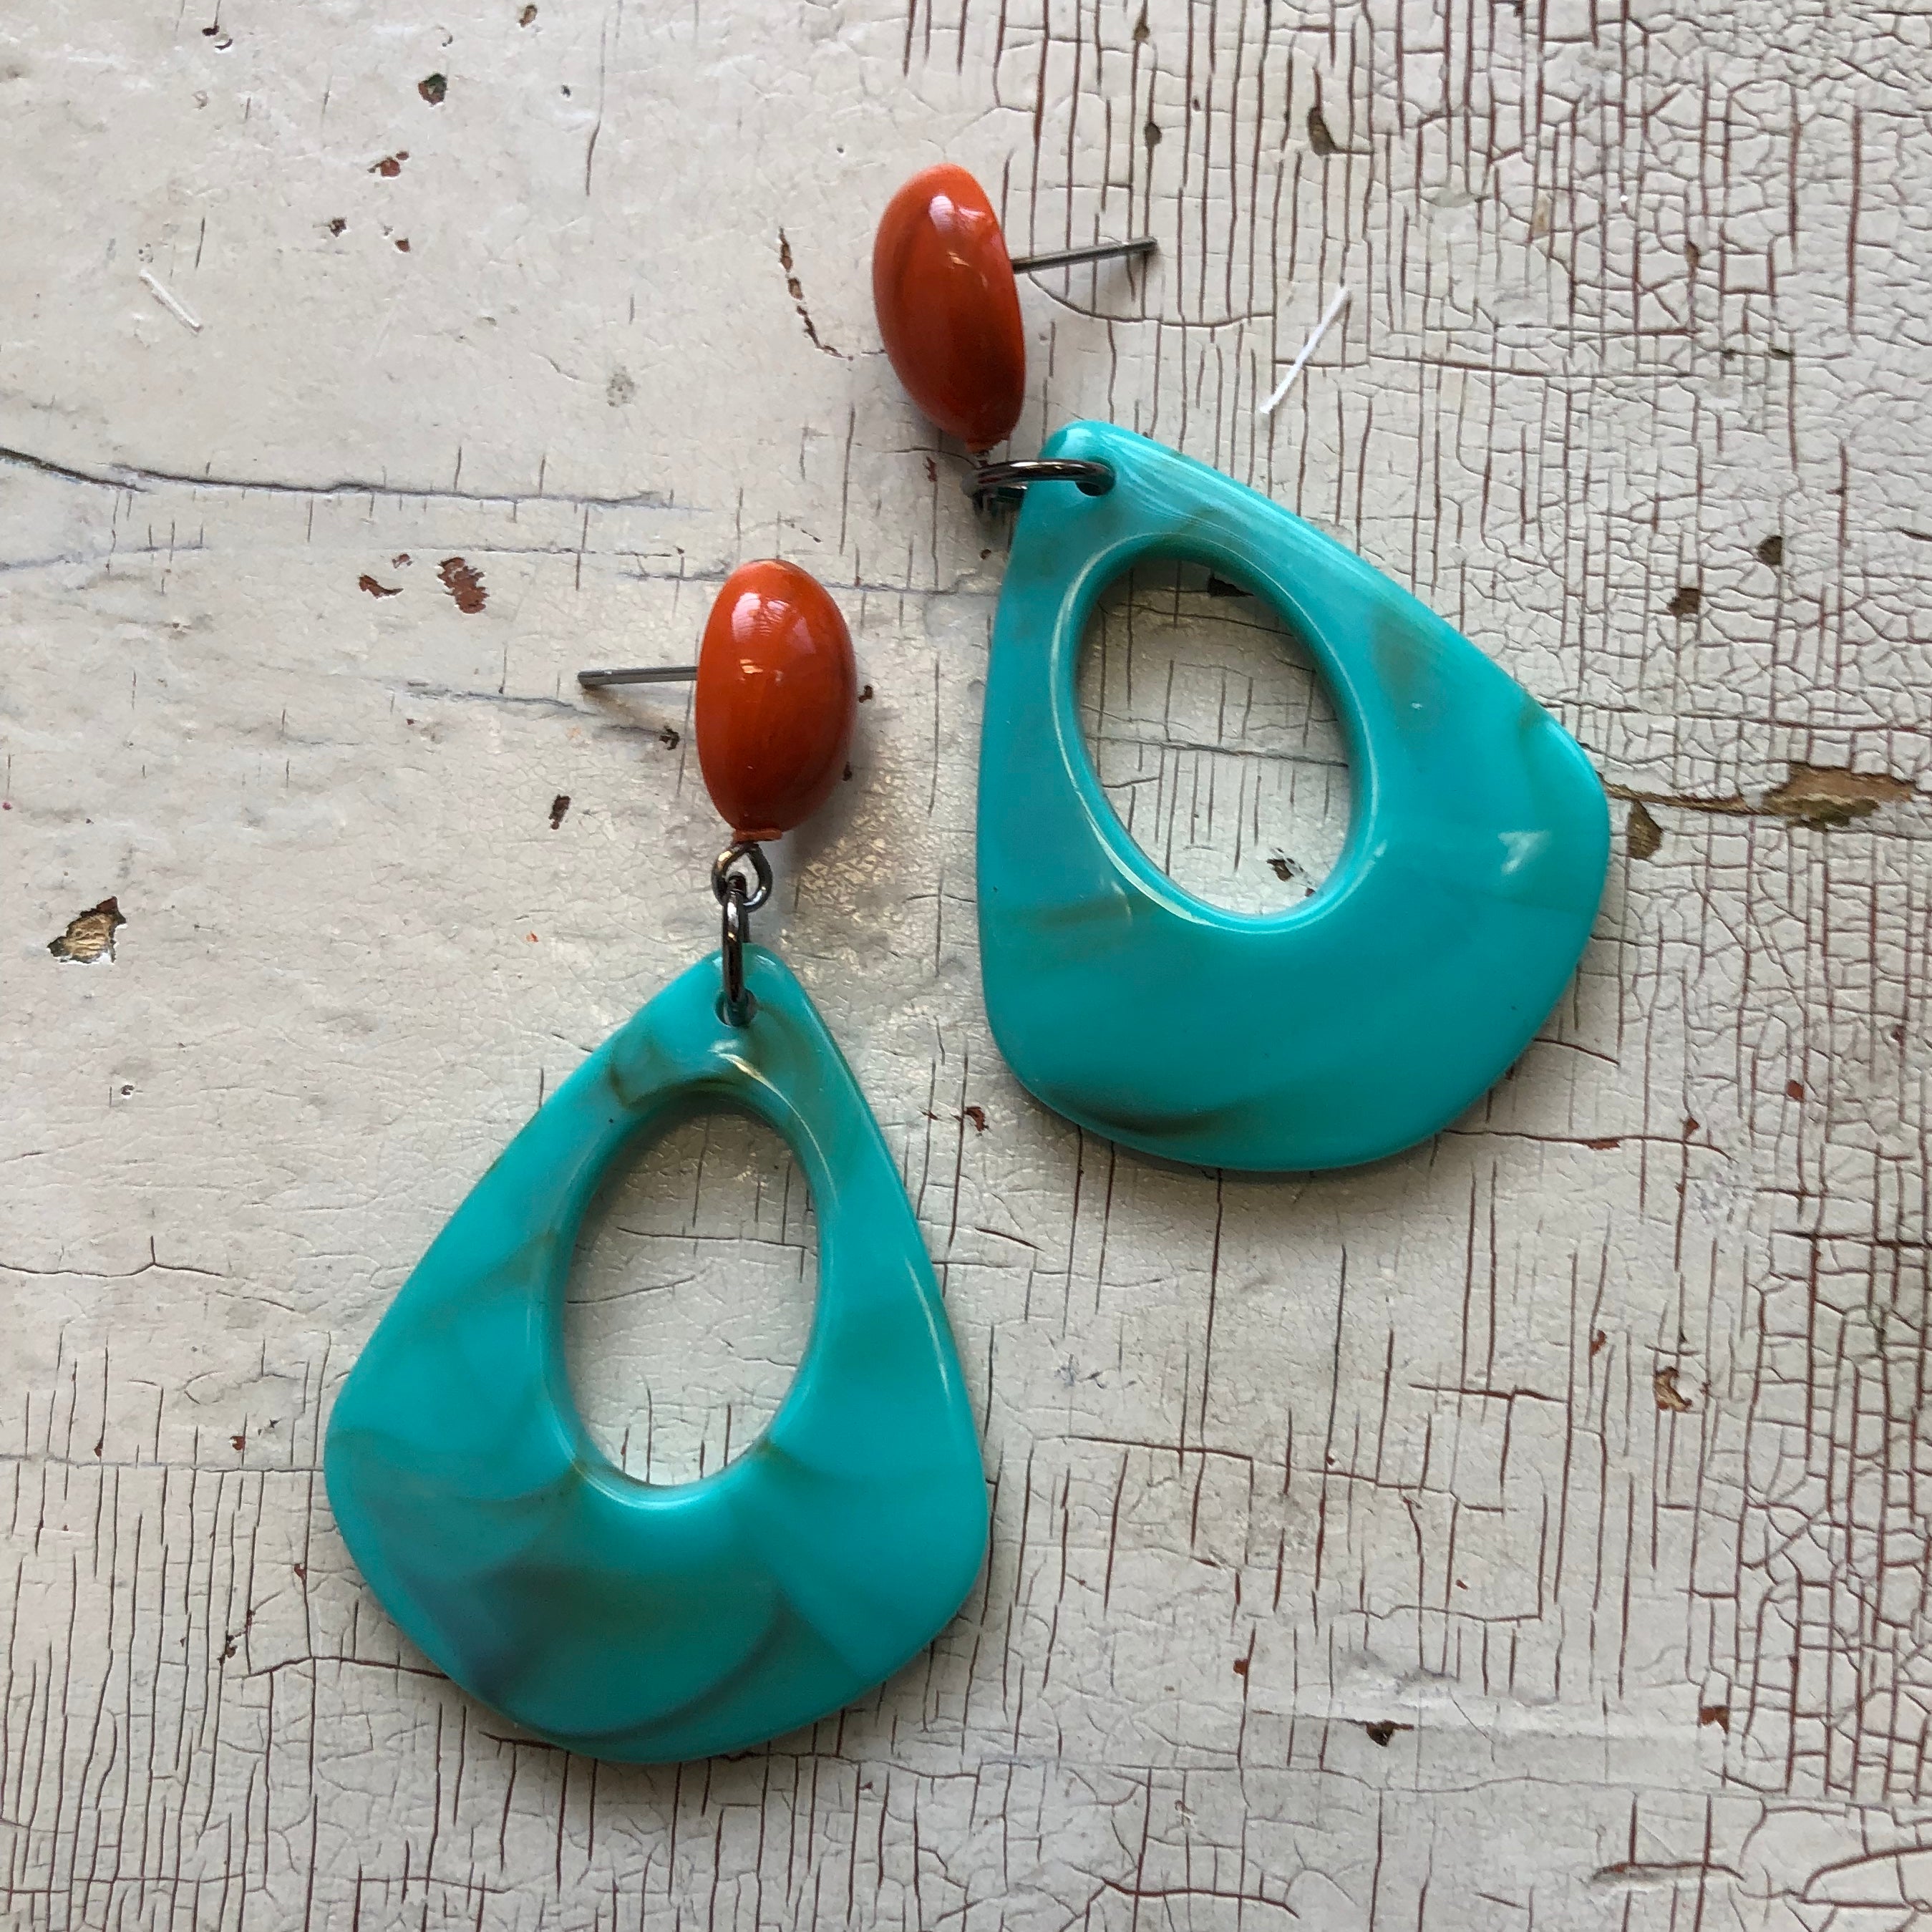 turquoise statement earrings